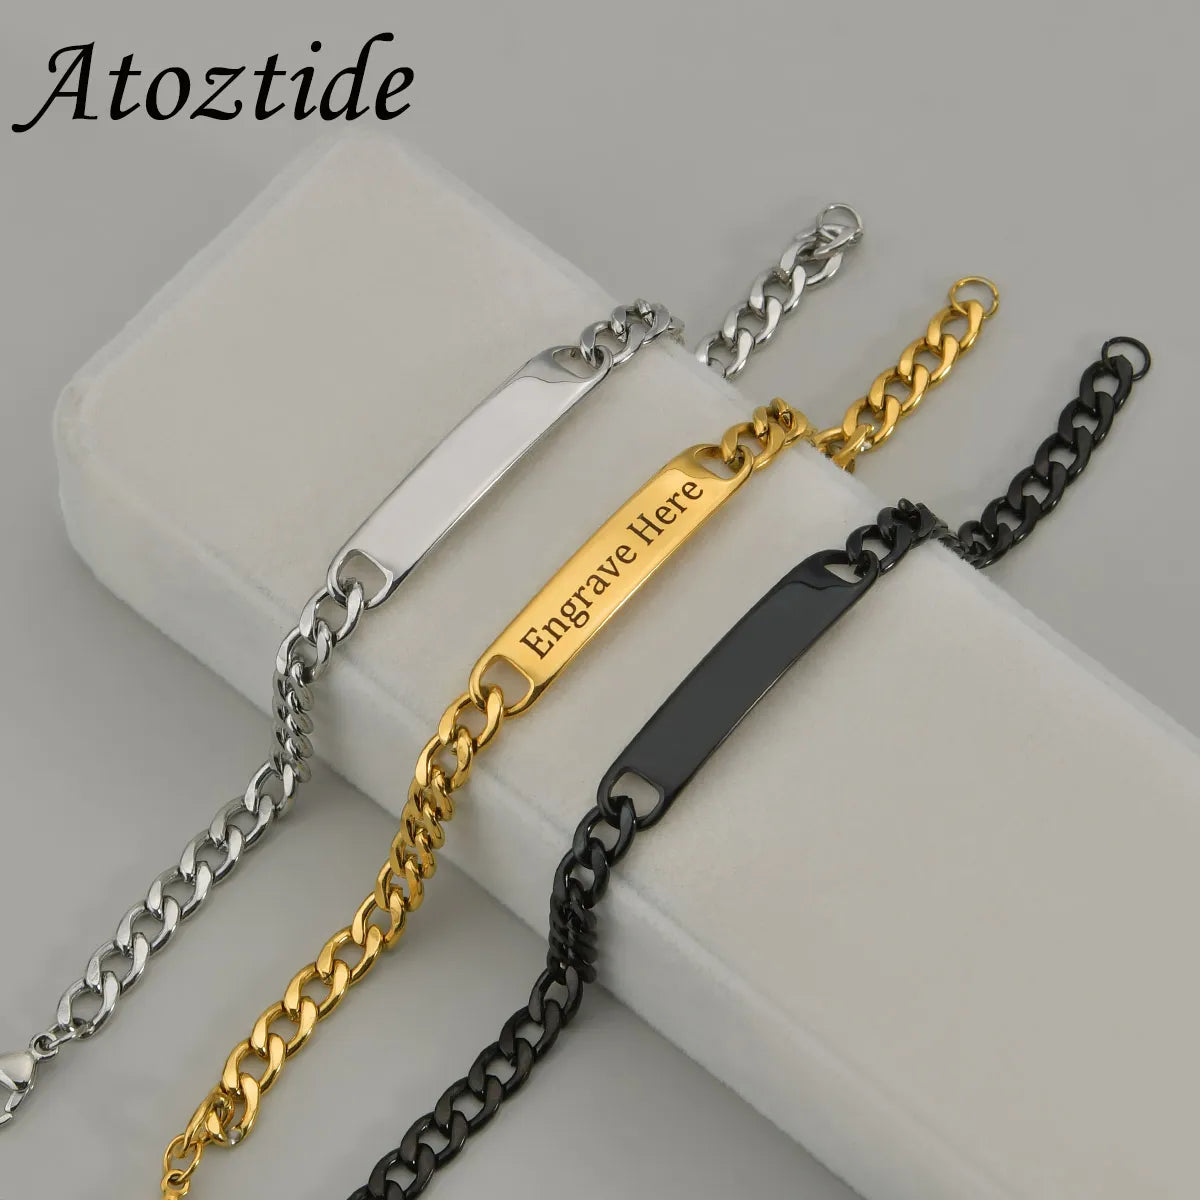 Atoztide Custom Words Name Bar Nameplate Bracelet Stainless Steel For Men Women Adjustable Link Chain Personalized Jewelry Gift